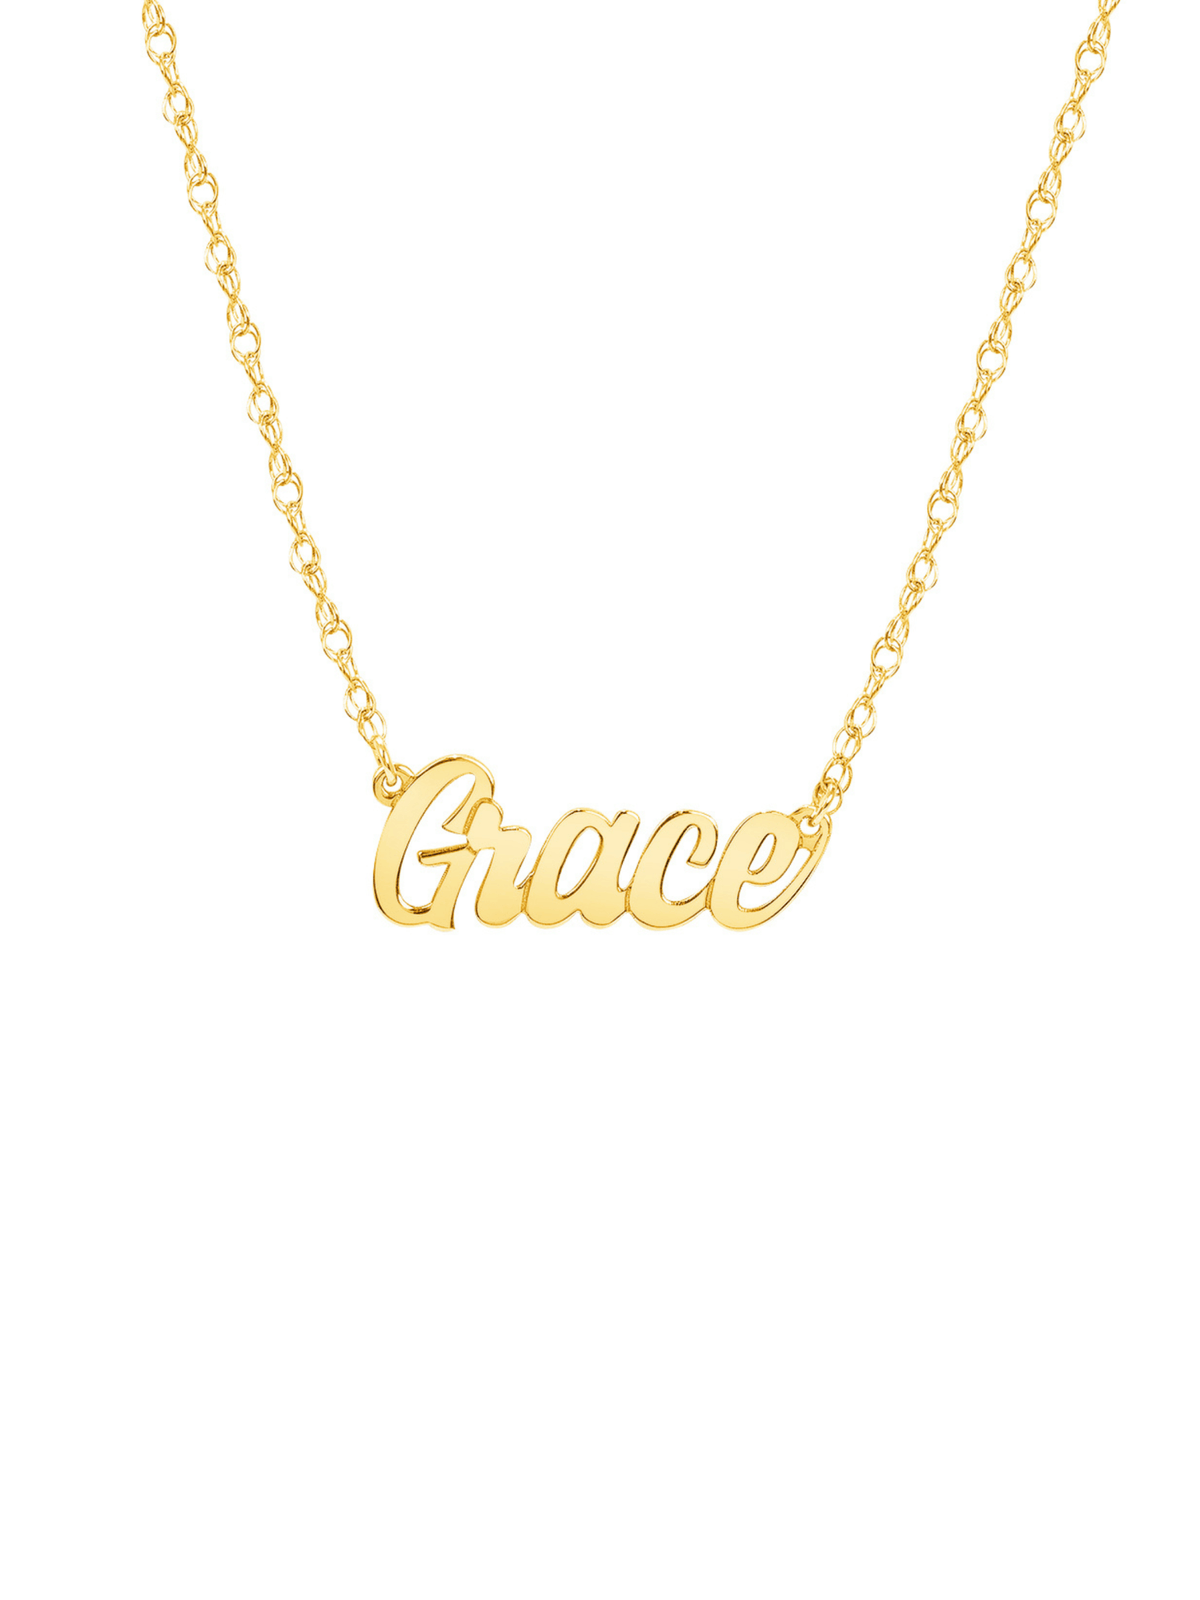 Yellow gold necklace with kids name on white background